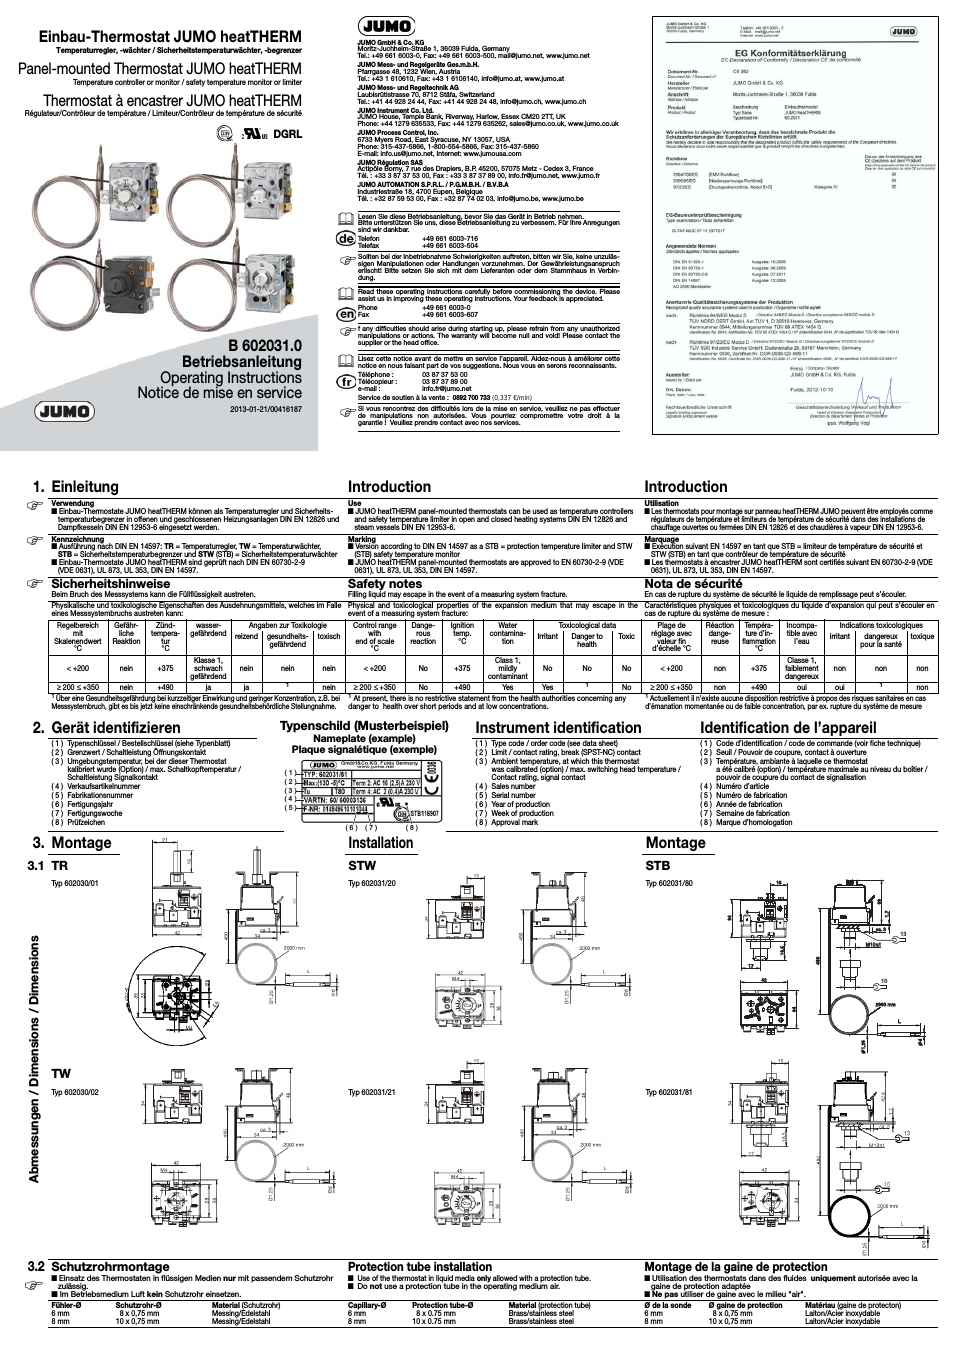 602031 Panel-Mounted Thermostat, heatTHERM Operating Manual